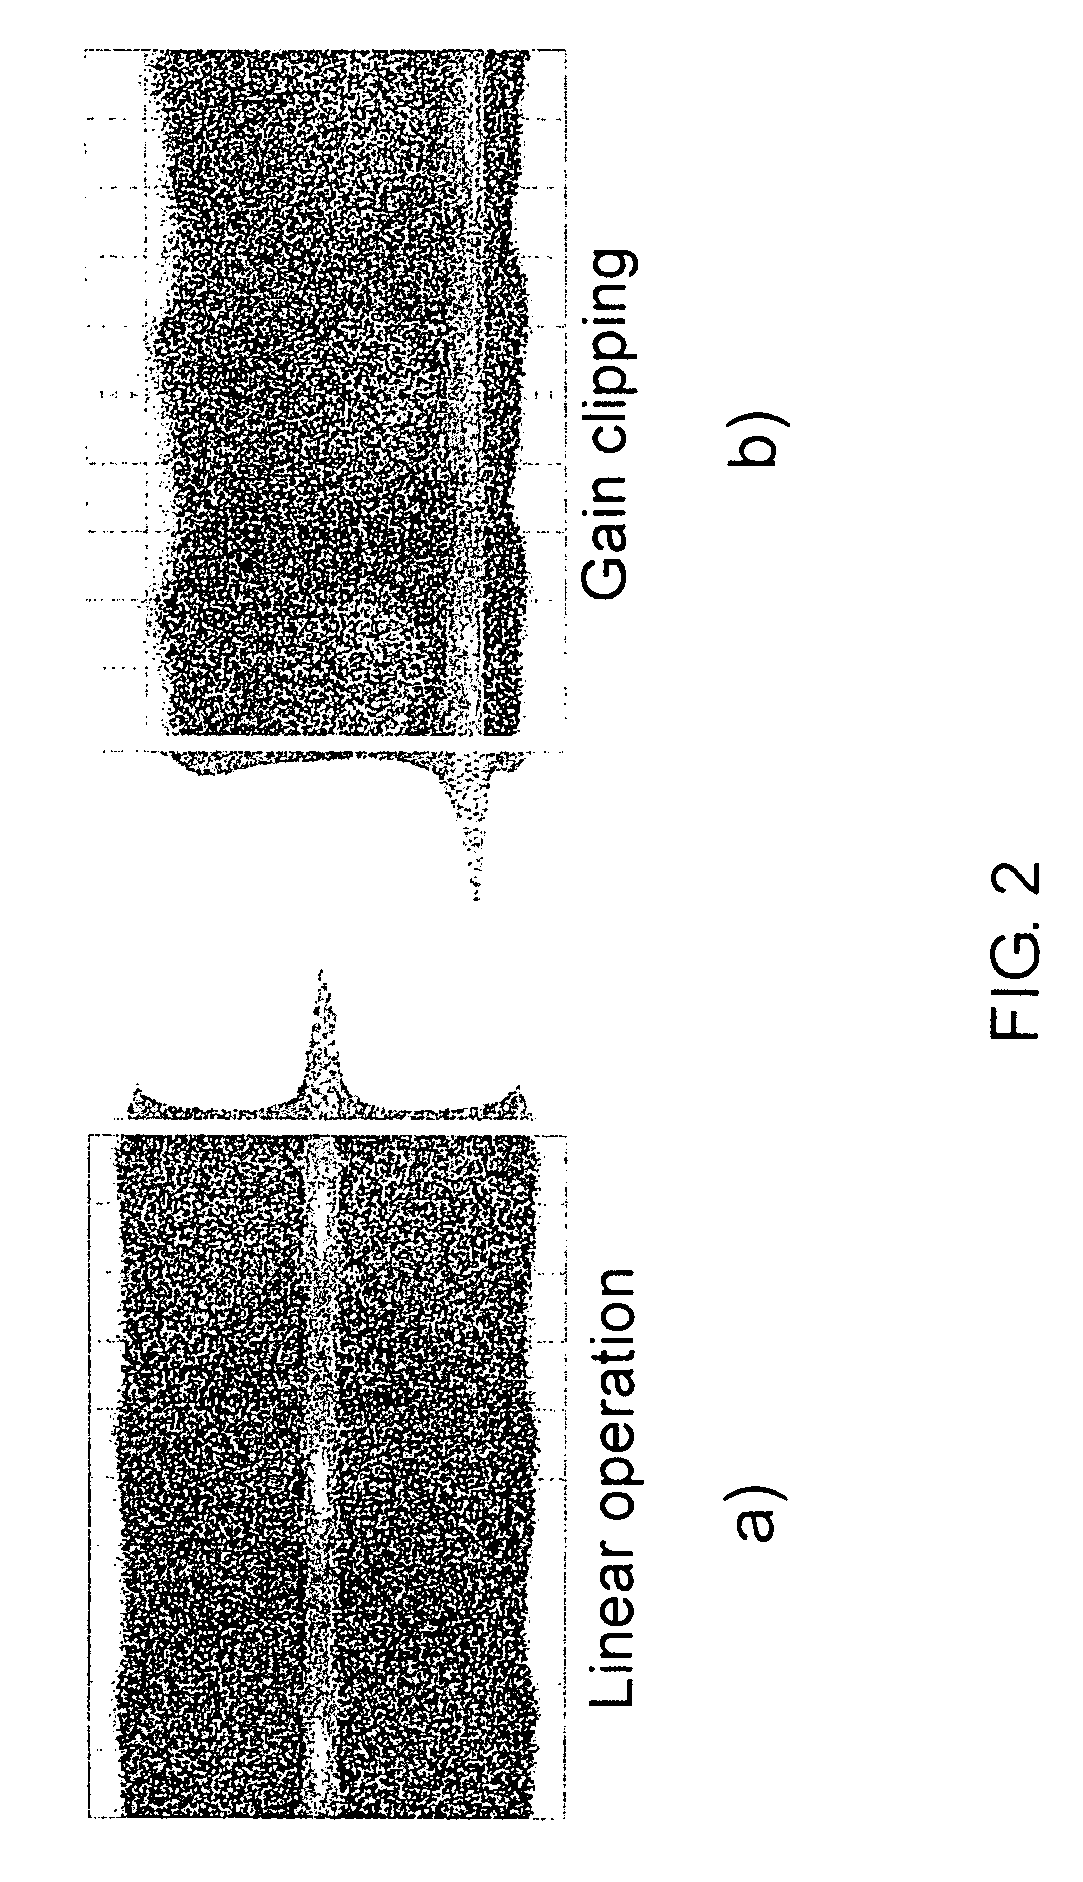 Multicasting optical switch fabric and method of detection based on novel heterodyne receiver